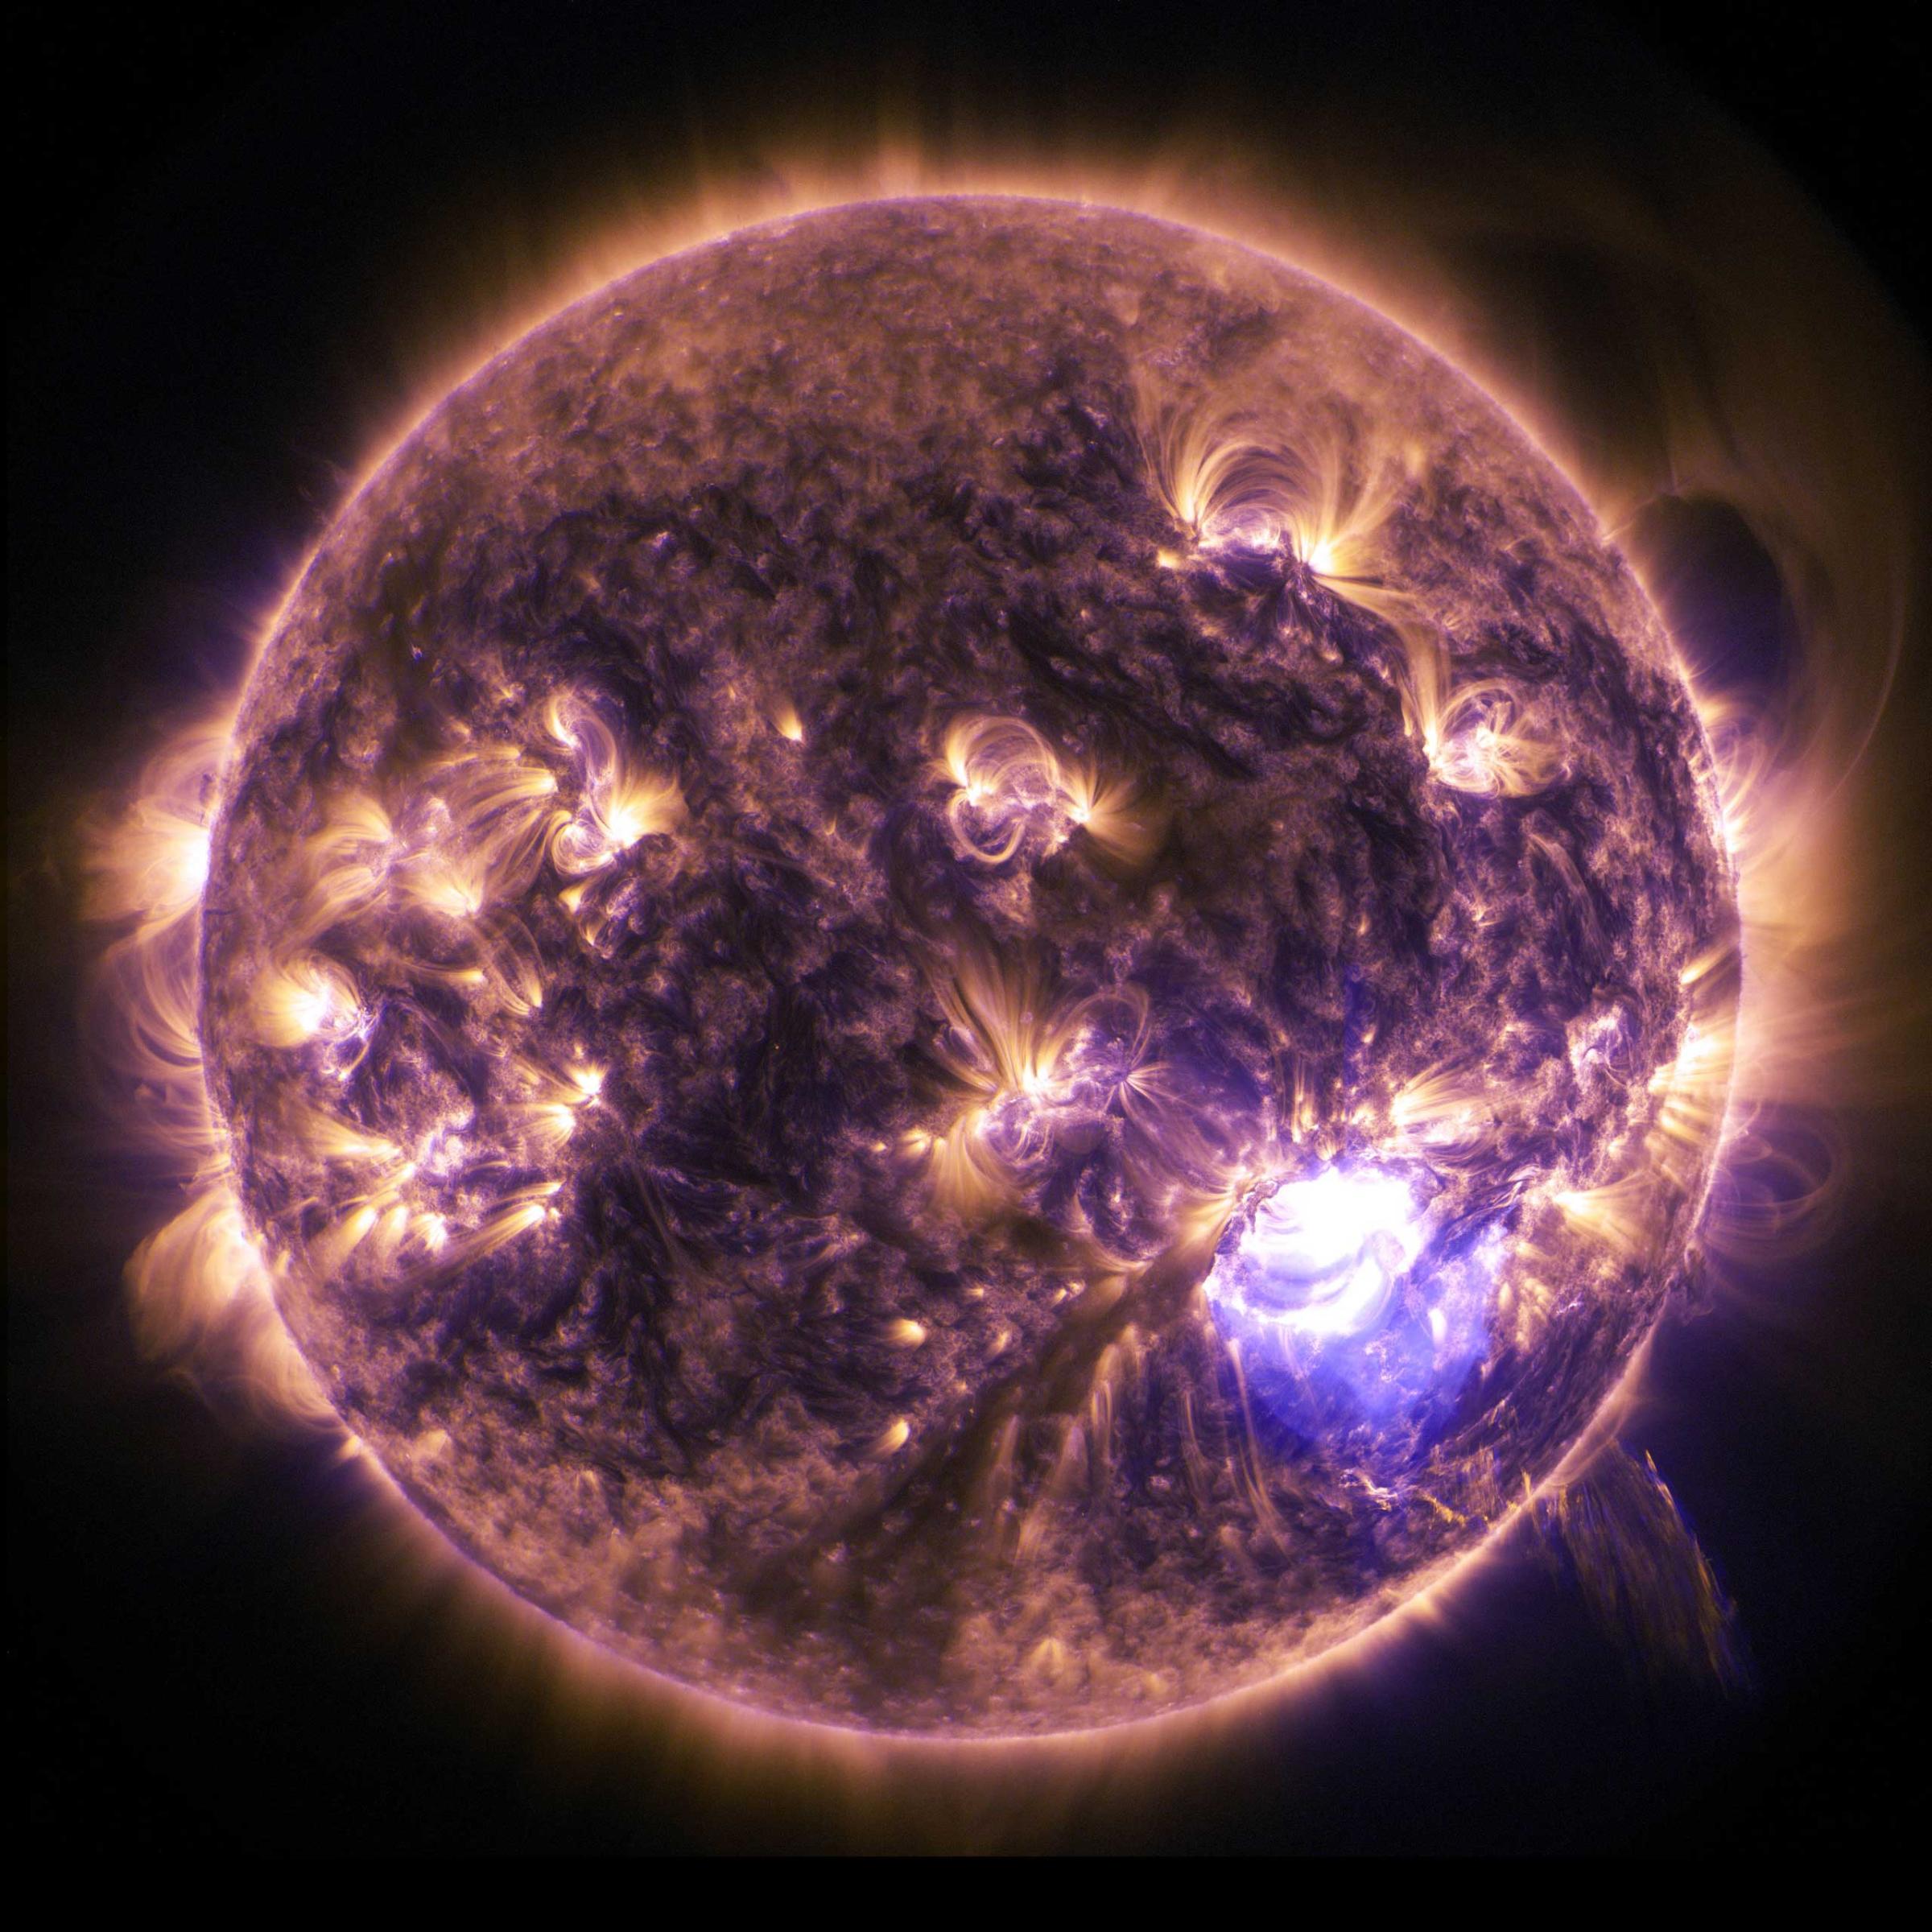 The sun emitted a significant solar flare, peaking at 7:28 p.m. EST on Dec. 19, 2014. NASA’s Solar Dynamics Observatory, which watches the sun constantly, captured an image of the event. Solar flares are powerful bursts of radiation. Harmful radiation from a flare cannot pass through Earth's atmosphere to physically affect humans on the ground, however -- when intense enough -- they can disturb the atmosphere in the layer where GPS and communications signals travel. This flare is classified as an X1.8-class flare. X-class denotes the most intense flares, while the number provides more information about its strength. An X2 is twice as intense as an X1, an X3 is three times as intense, etc.